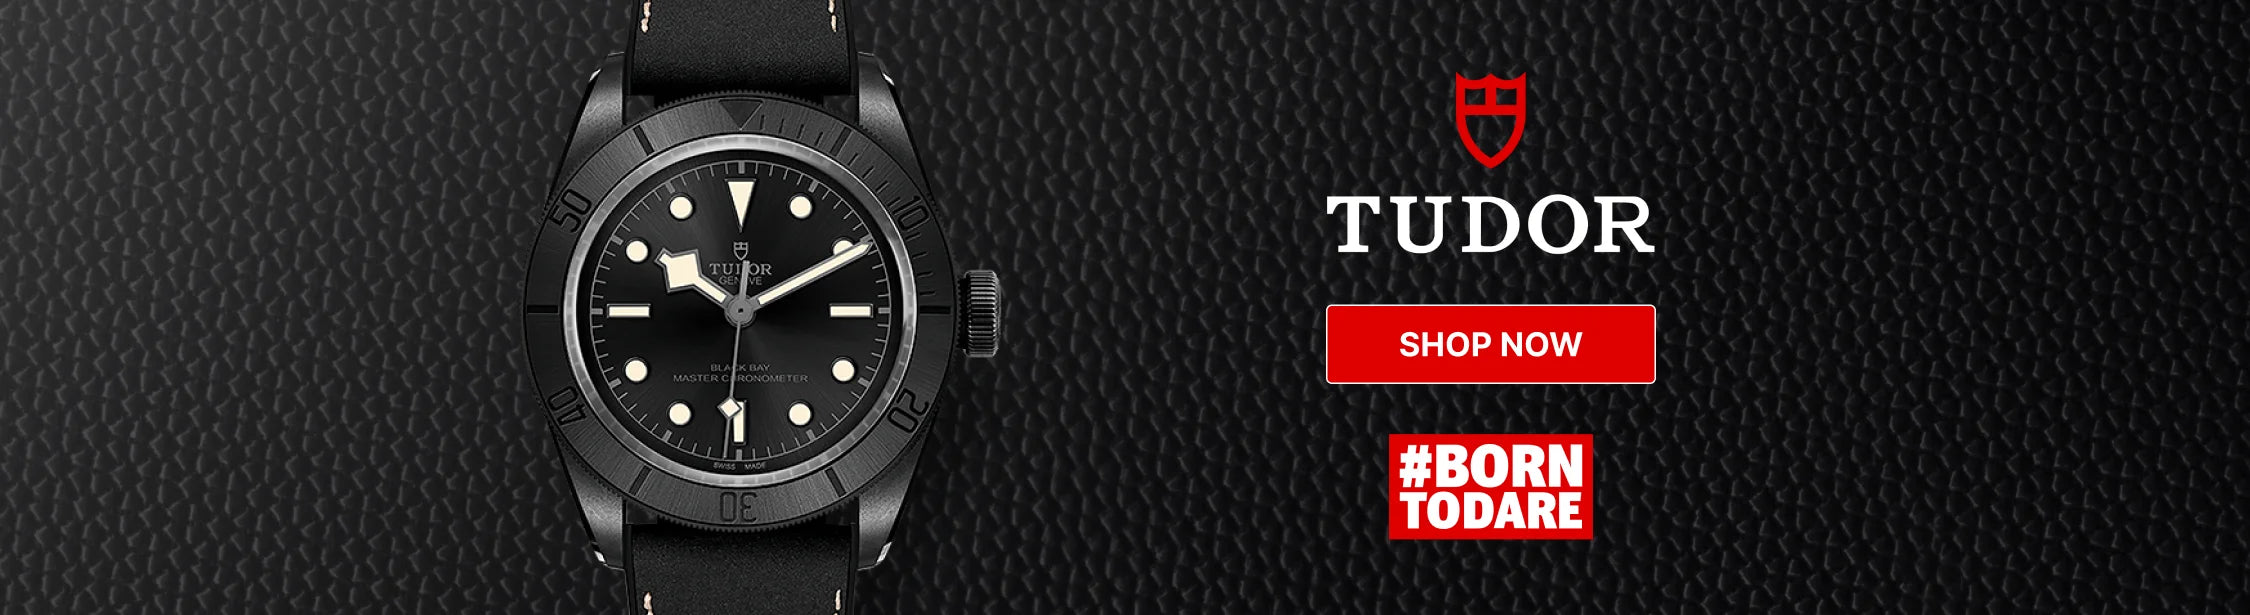 TUDOR watches at Orr's Jewelers in Sewickley, PA